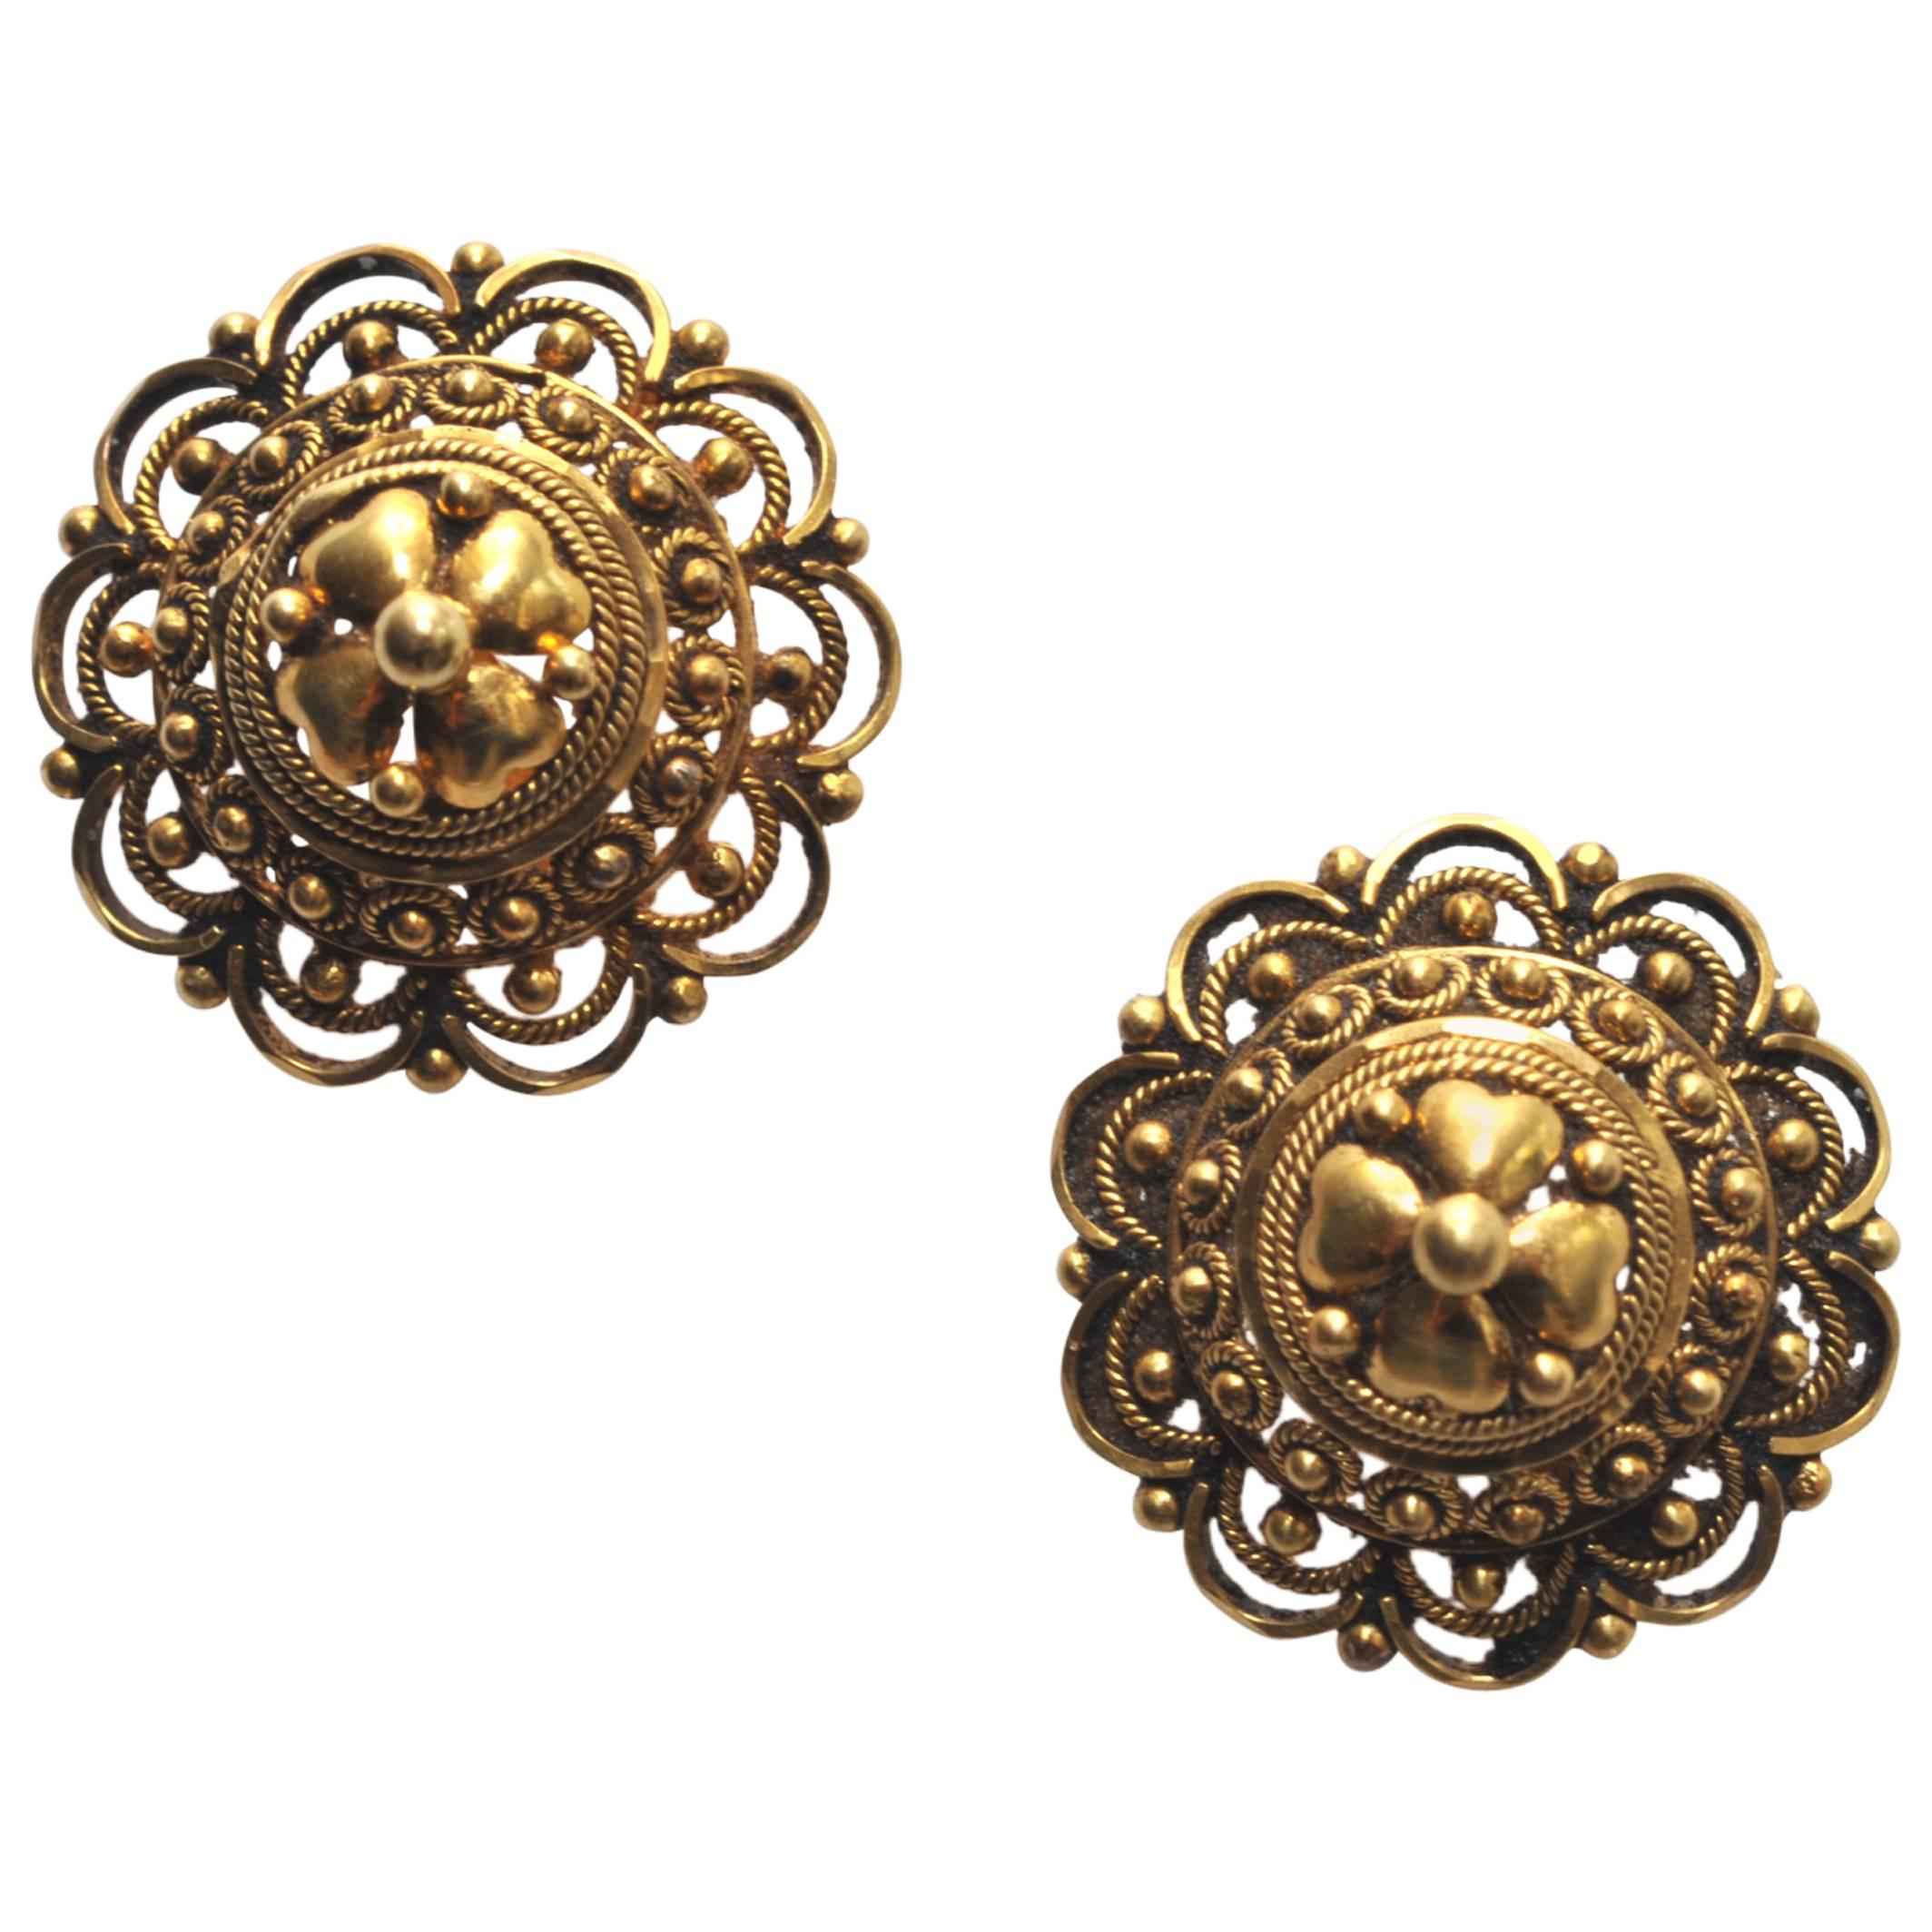 Indian Hand-Tooled Gold Stud Earrings